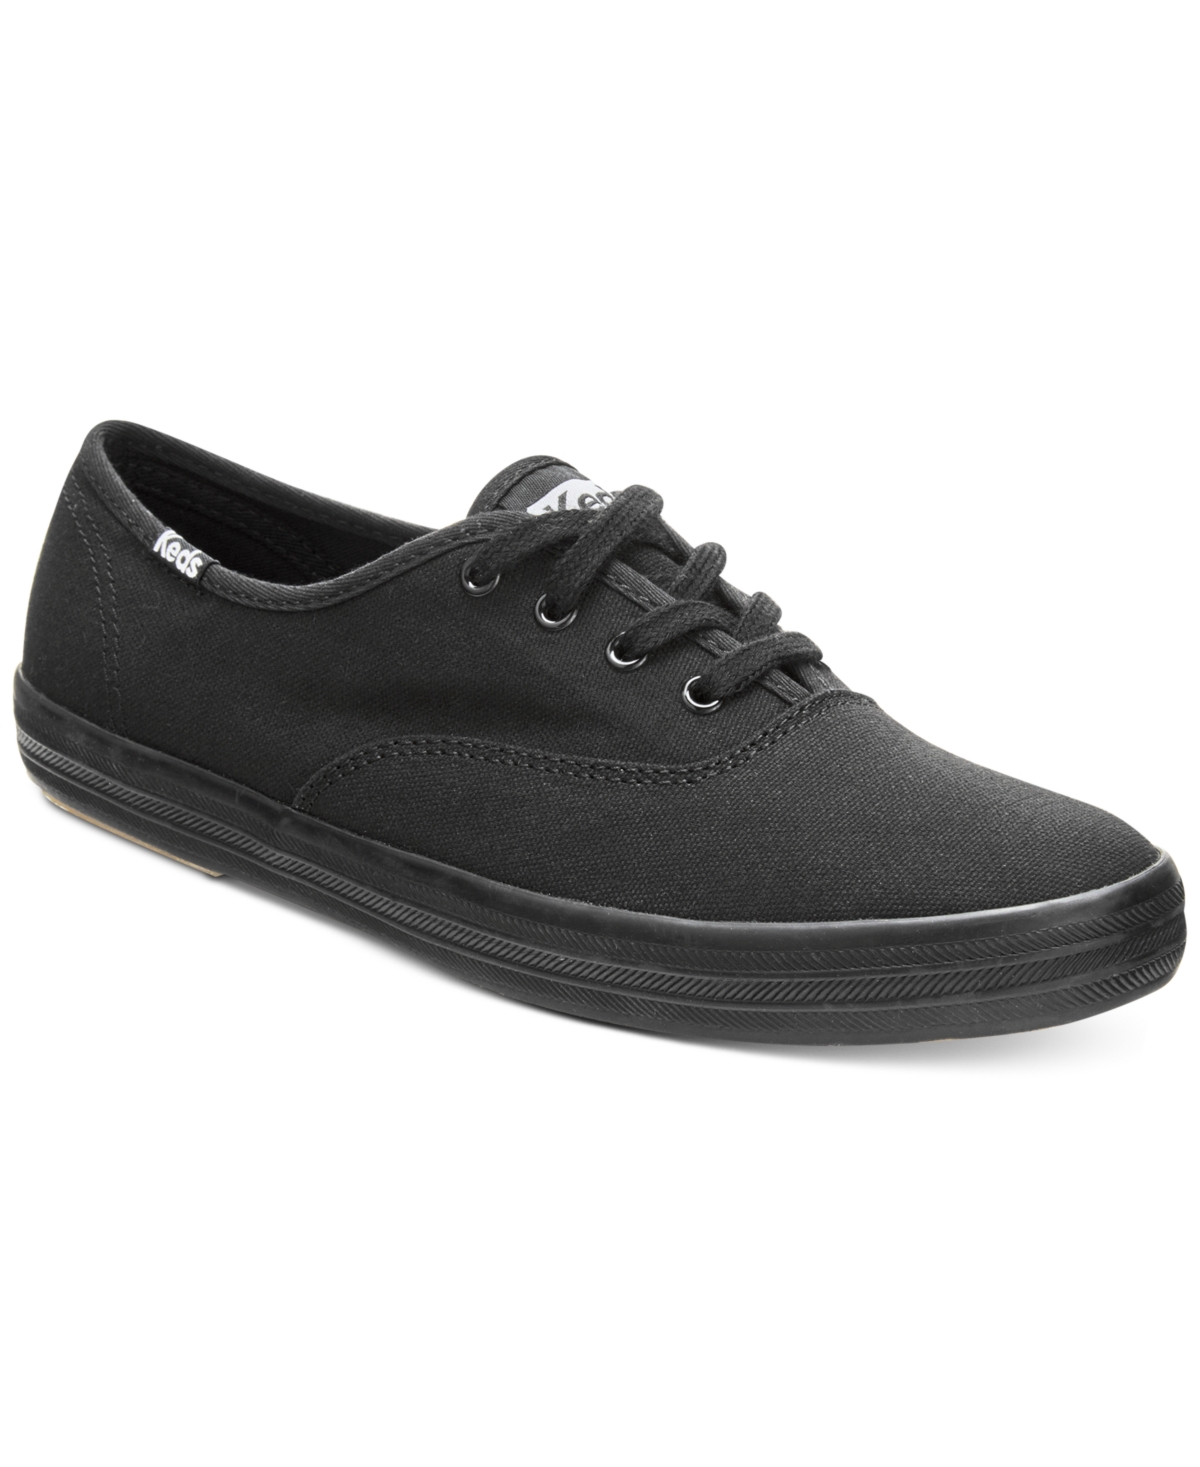 UPC 044208122768 product image for Keds Women's Champion Ortholite Lace-Up Oxford Fashion Sneakers from Finish Line | upcitemdb.com